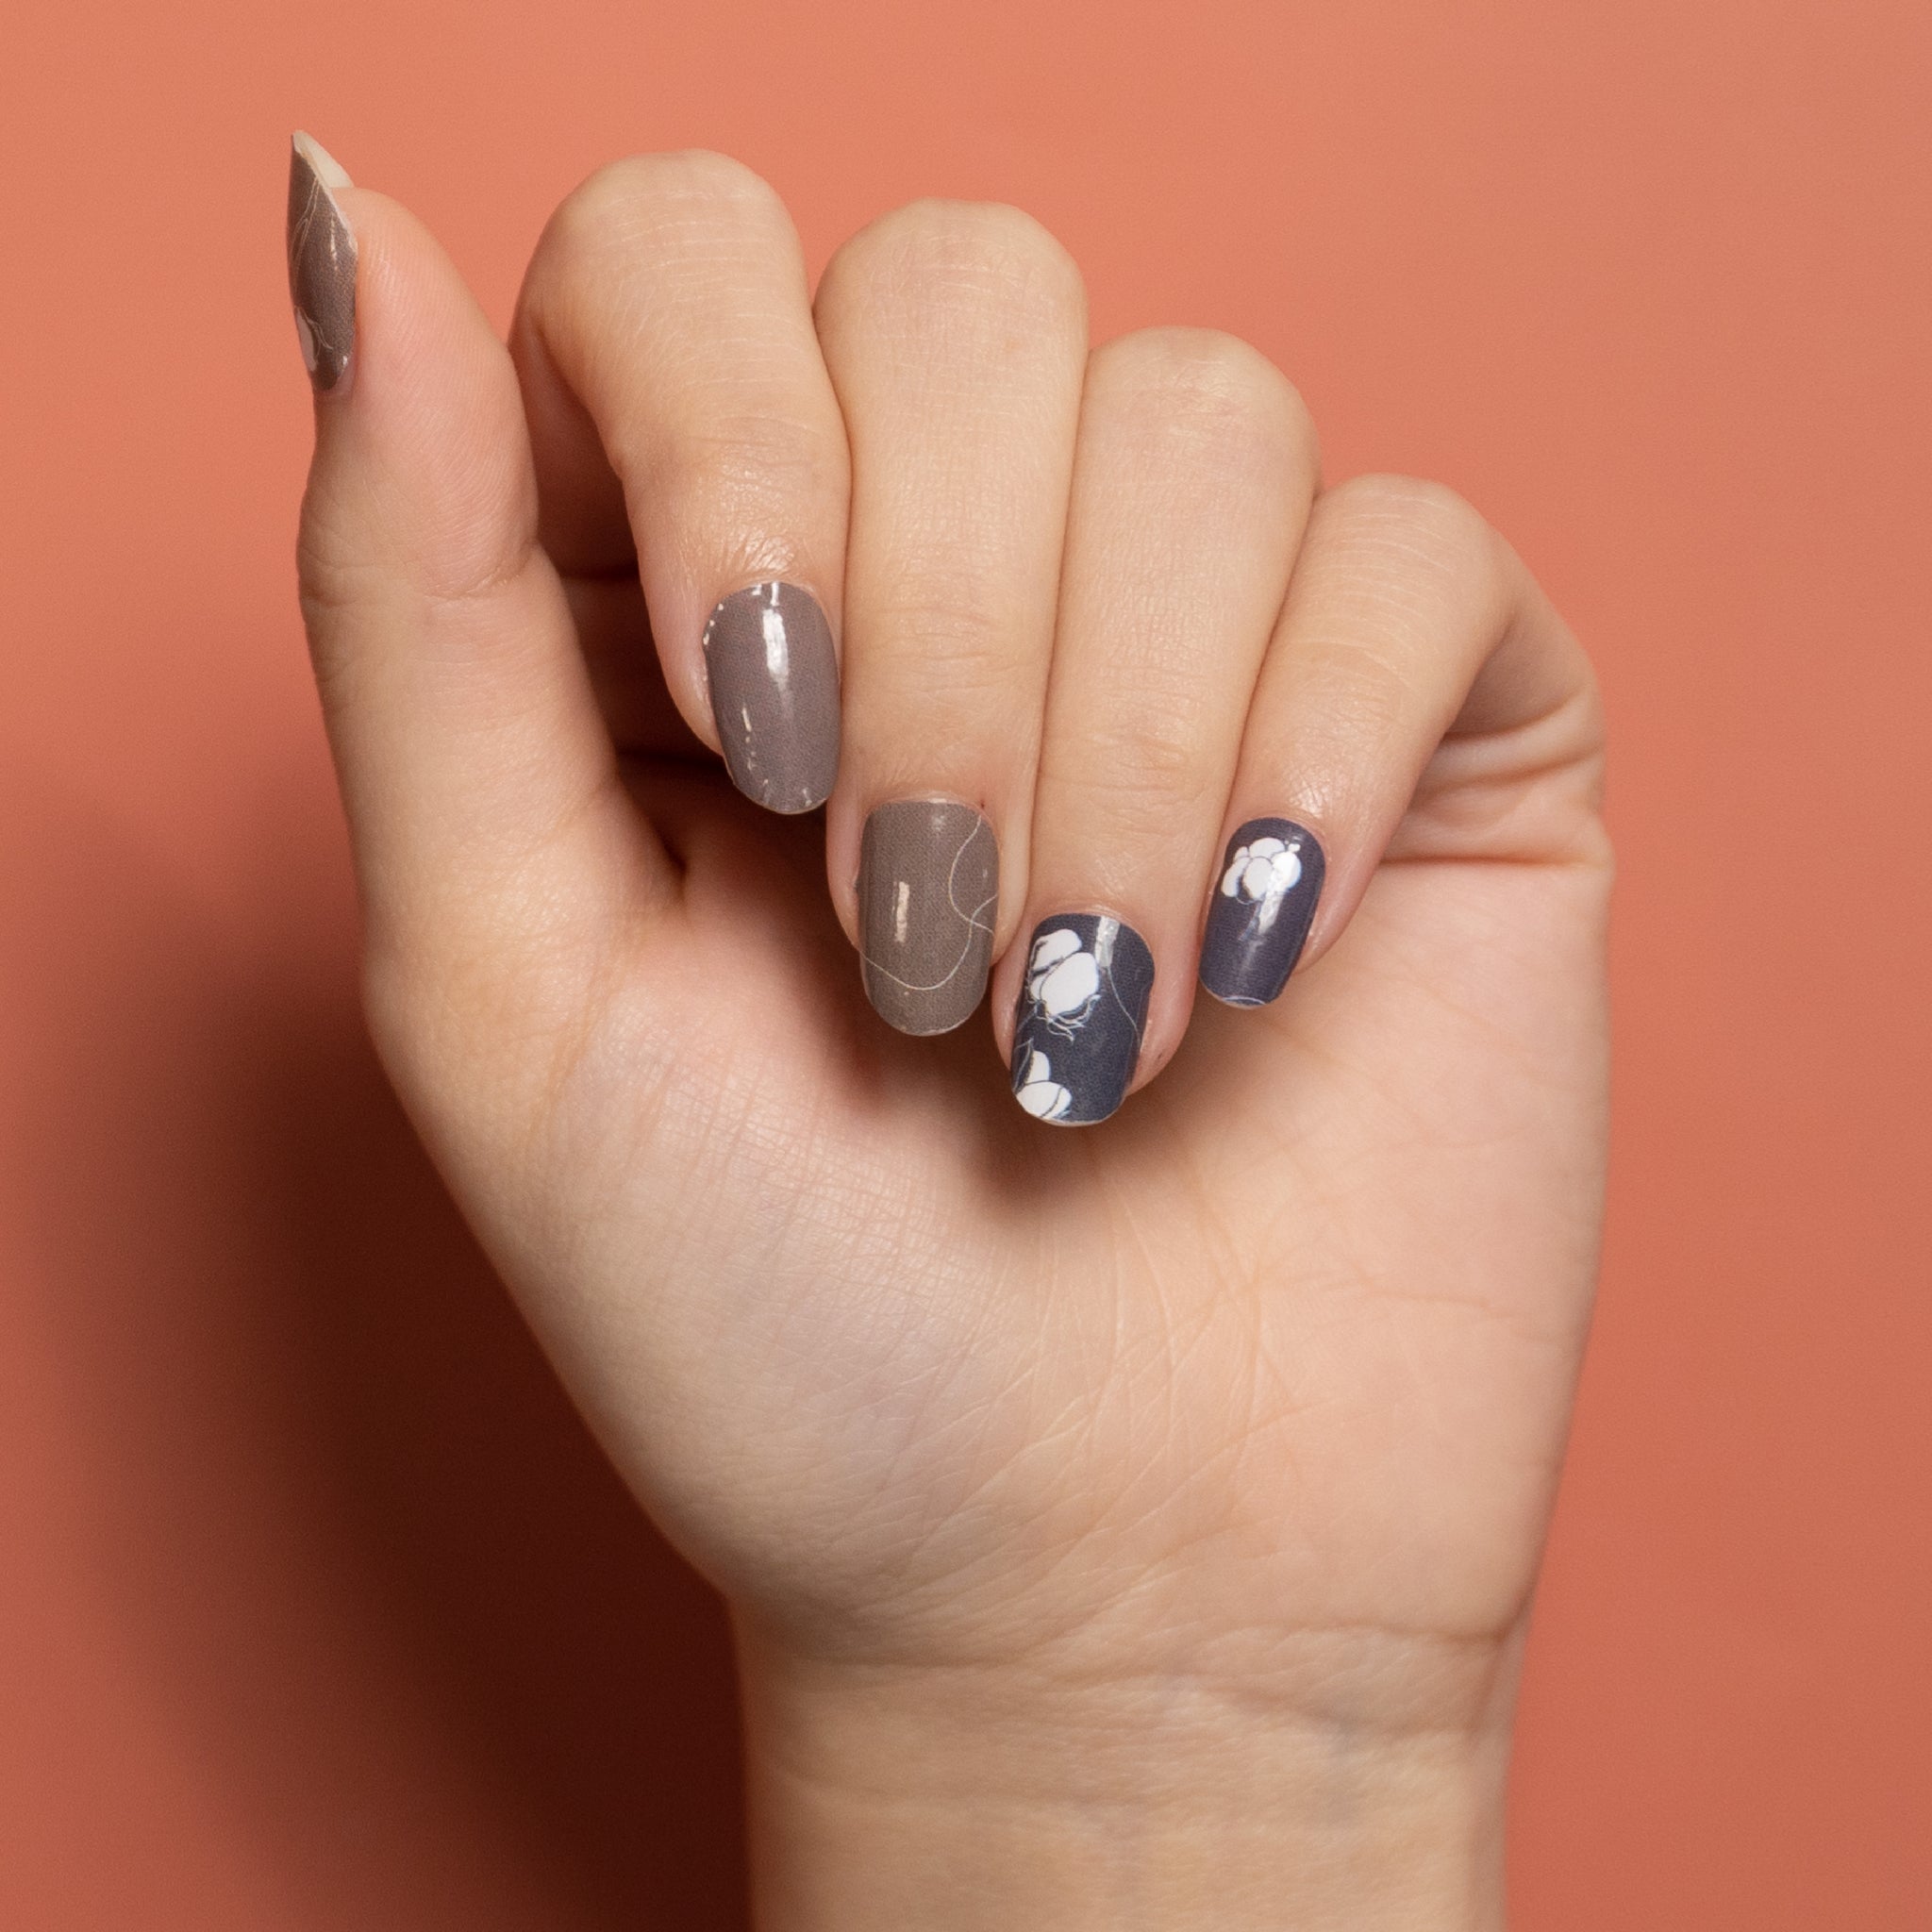 Lavender Nails & Spa Boutique: Read Reviews and Book Classes on ClassPass